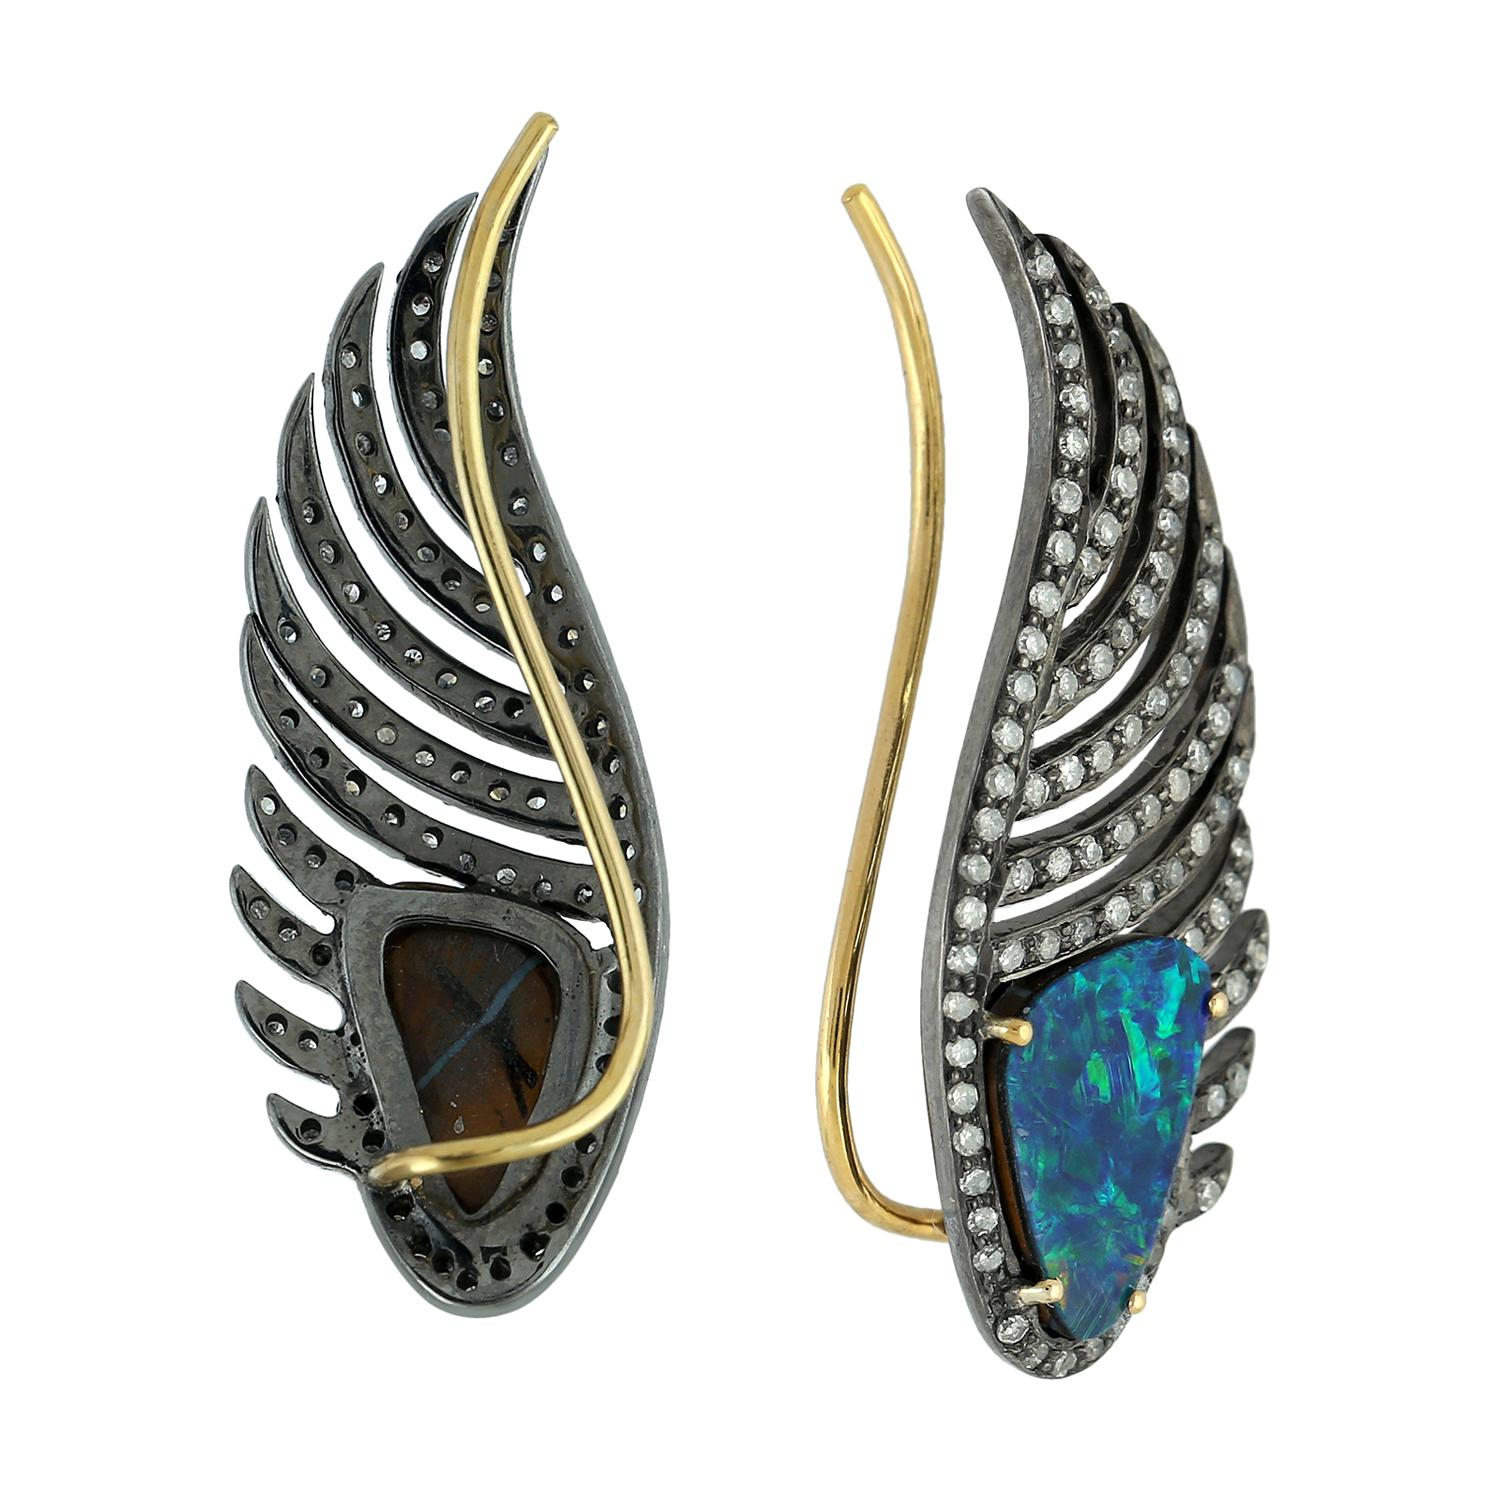 These feather ear climbers are handmade in 18-karat gold and sterling silver. It is set with 3.0 carats opal doublets & .71 carats of glimmering diamonds.

FOLLOW  MEGHNA JEWELS storefront to view the latest collection & exclusive pieces.  Meghna